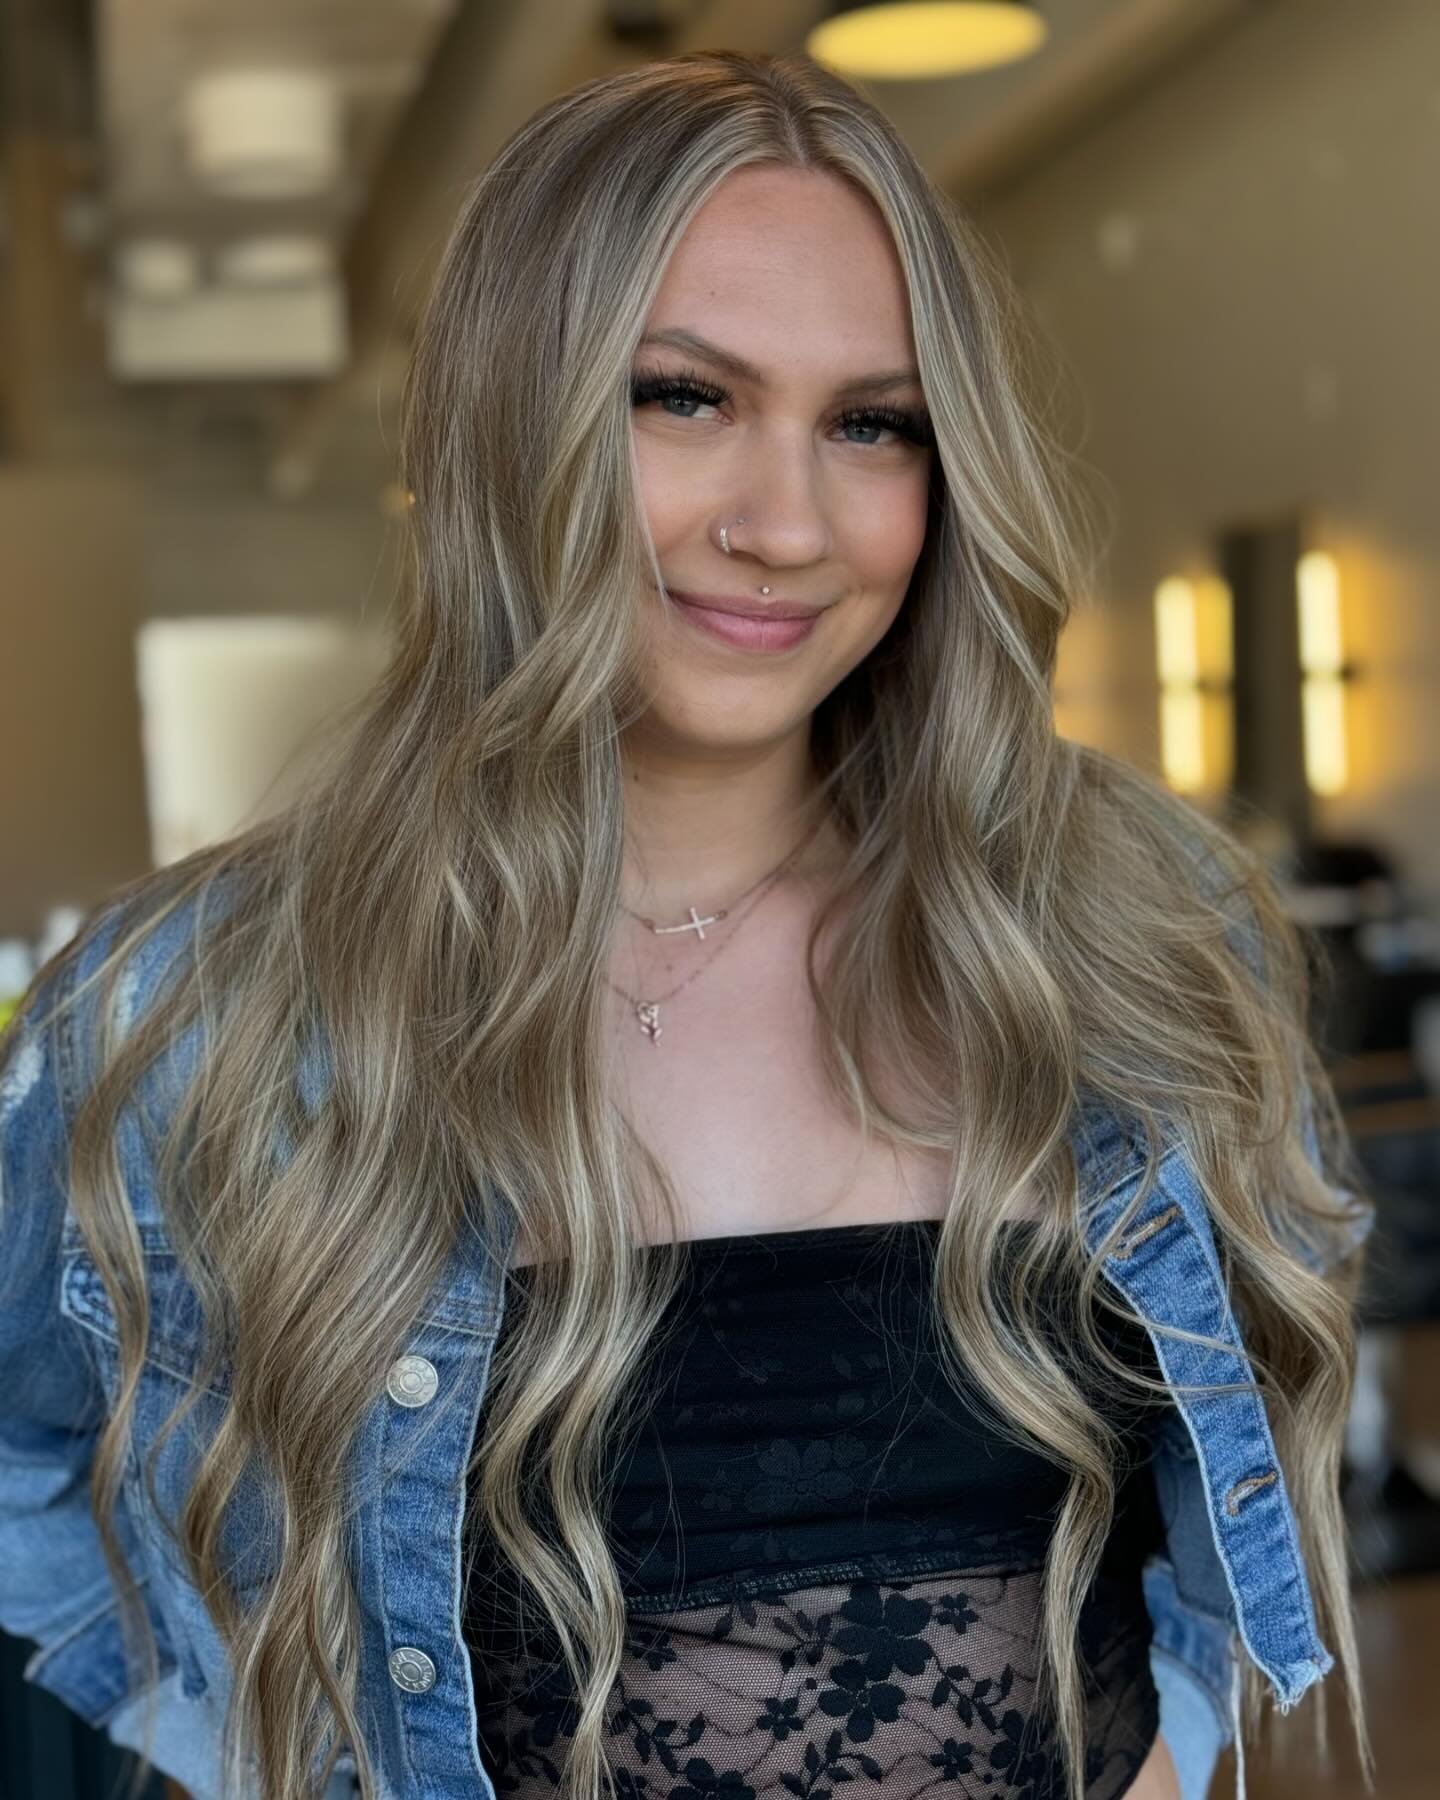 🌟 Unleash your inner bombshell with a stunning makeover by our fabulous stylist Katy! 💇✨ Flirty, fierce, and absolutely fabulous&mdash;discover your signature style with us. 

Ready to turn heads? Book your complimentary consultation today and let&